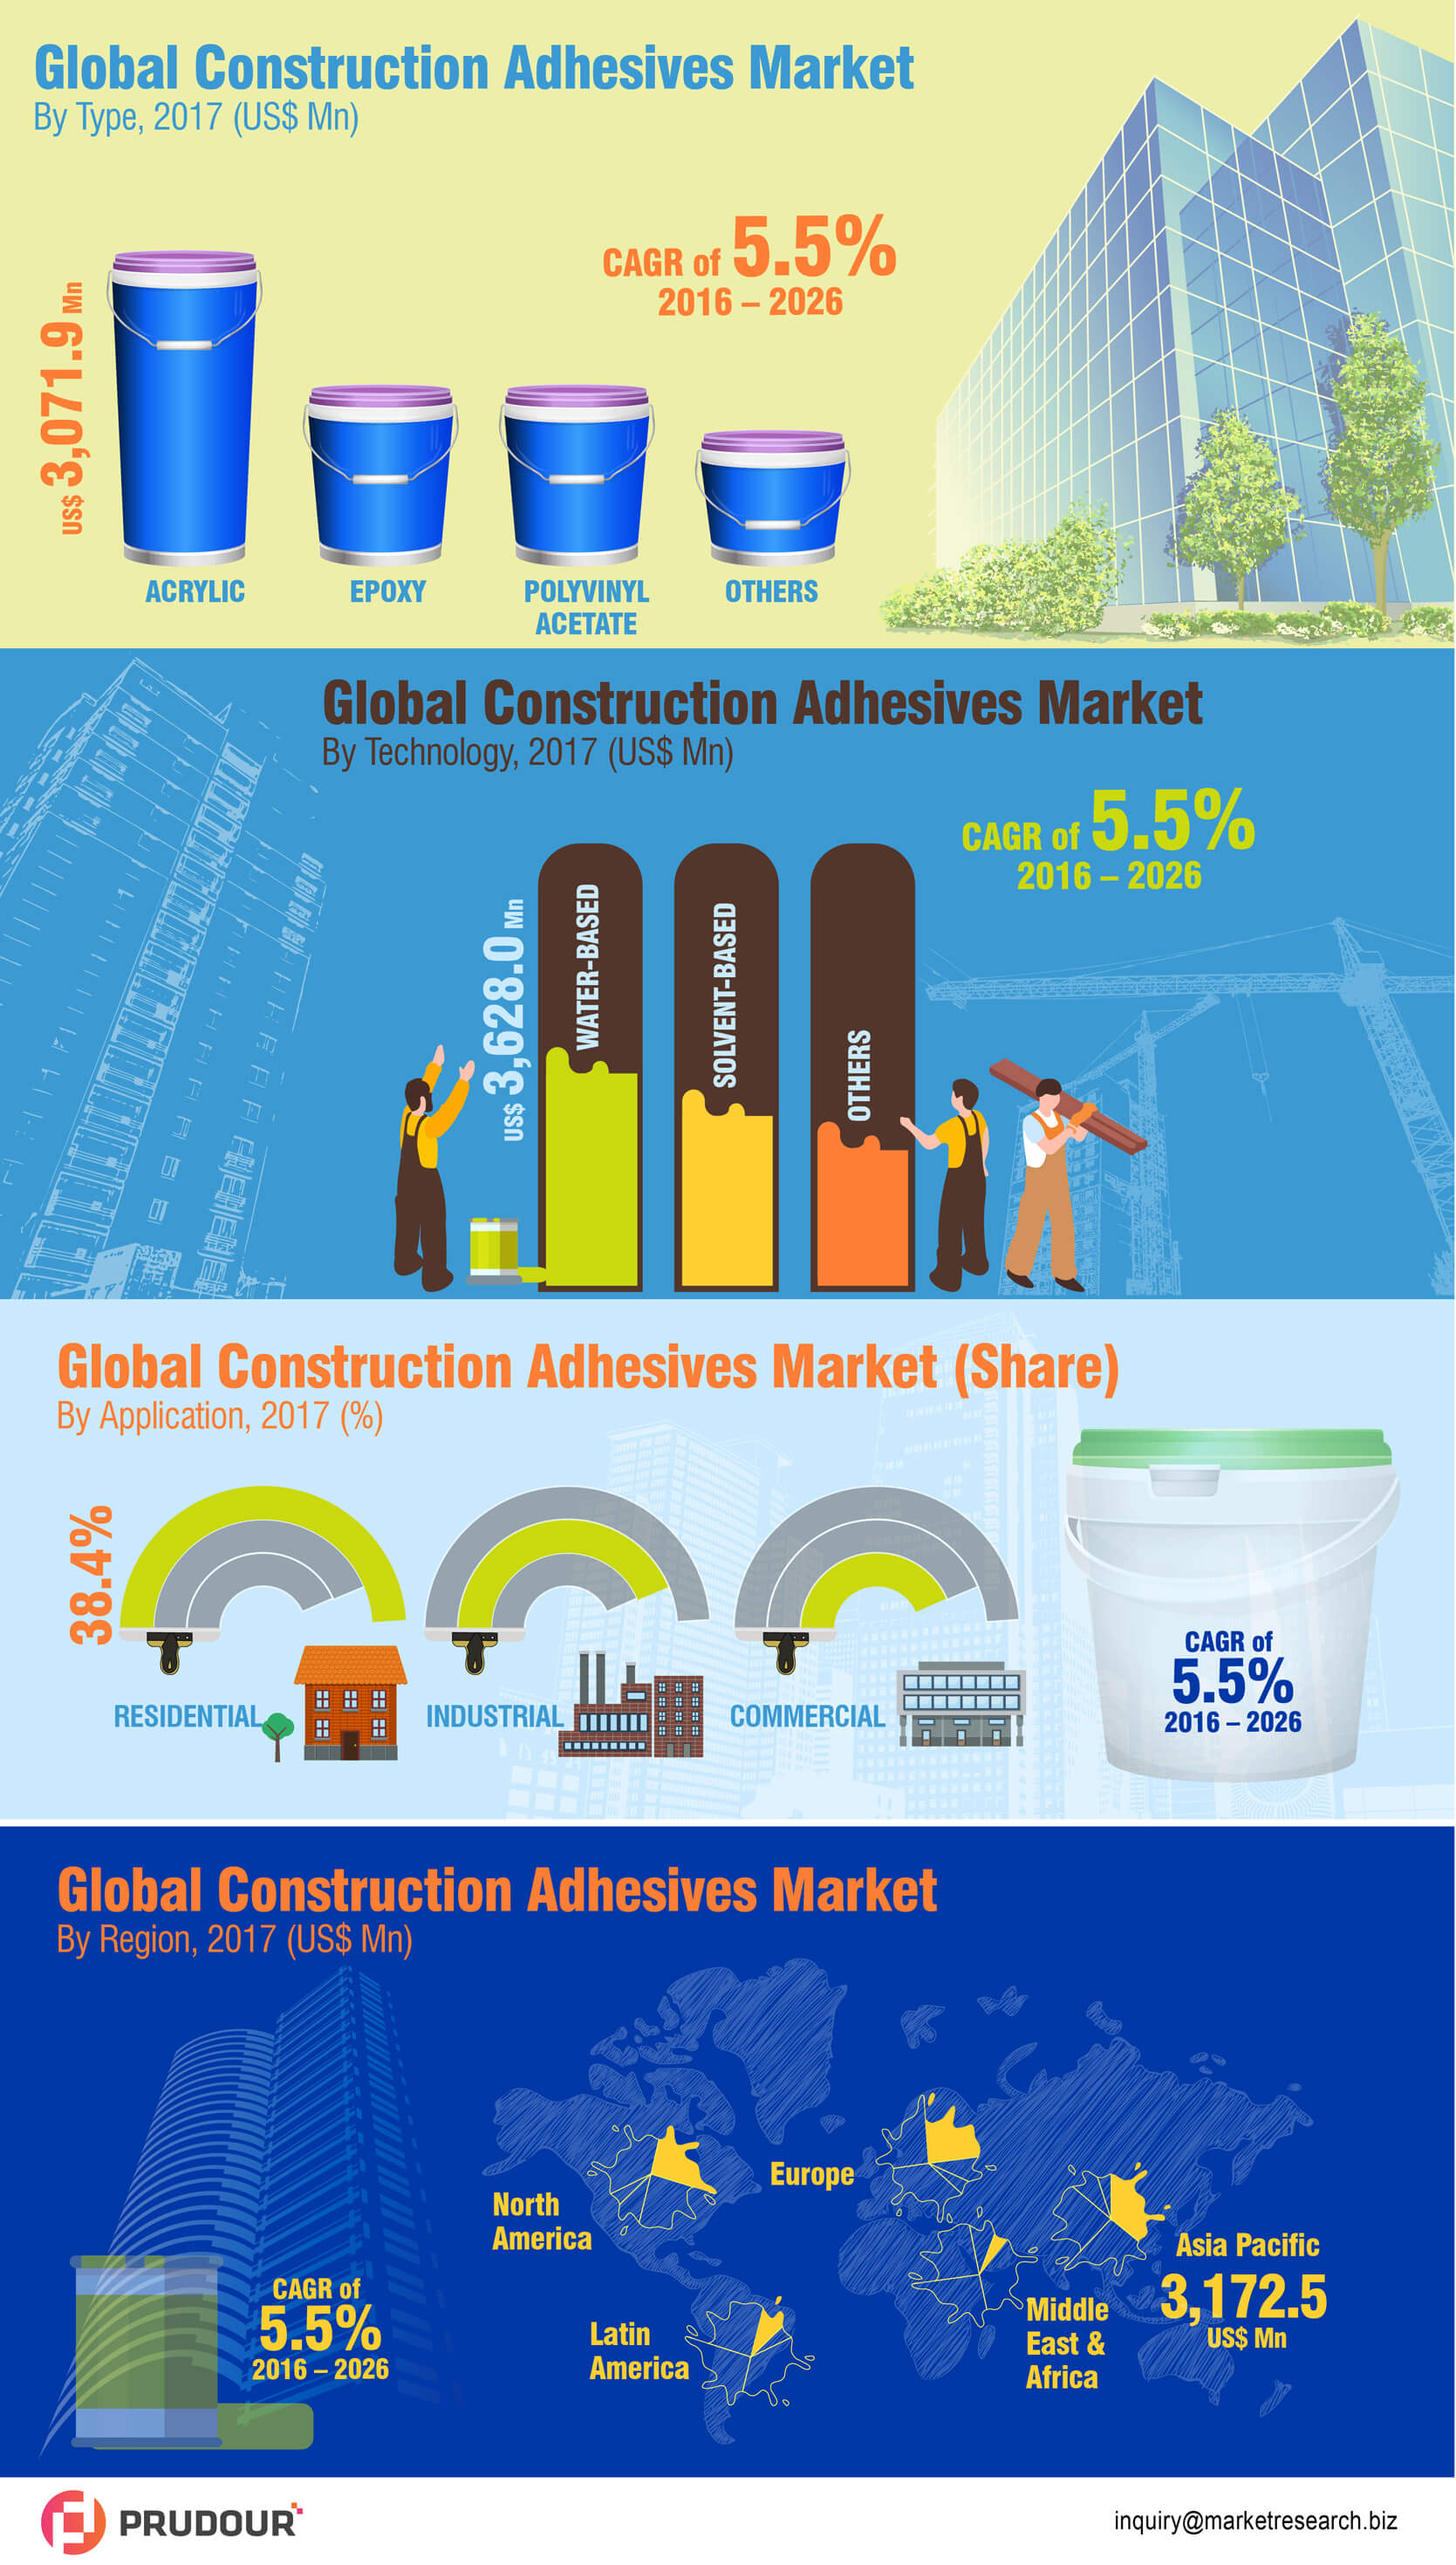 To Boost With CAGR Of 5.5%: Global Construction Adhesives Market Rise With CAGR of 5.5% from 2017 to 2026